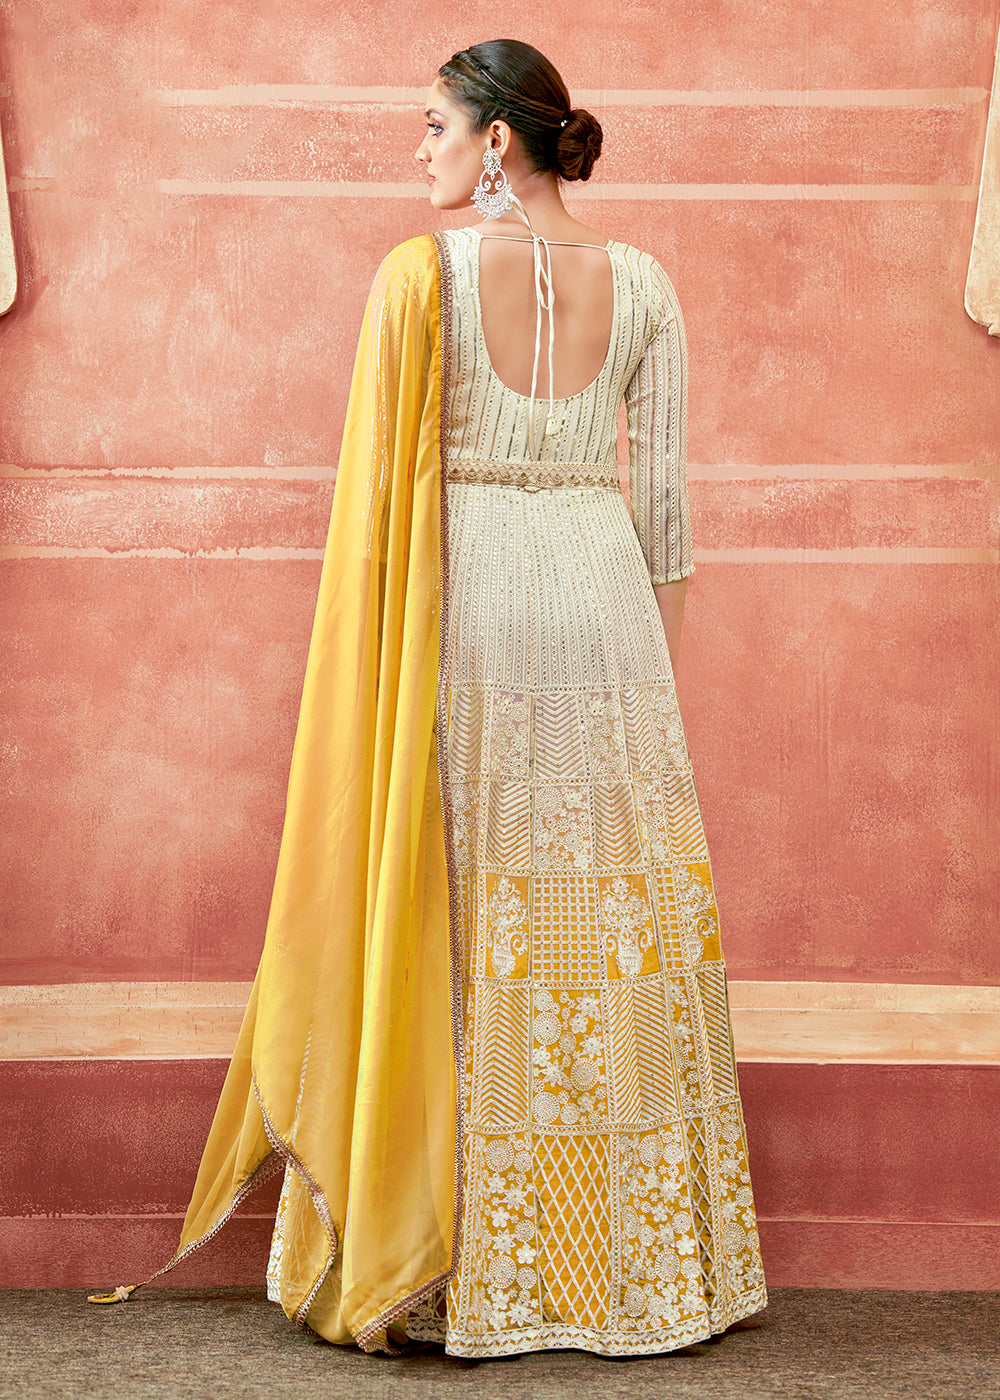 Buy Now Off White & Yellow Georgette Embroidered Festive Anarkali Suit Online in USA, UK, Australia, New Zealand, Canada & Worldwide at Empress Clothing. 